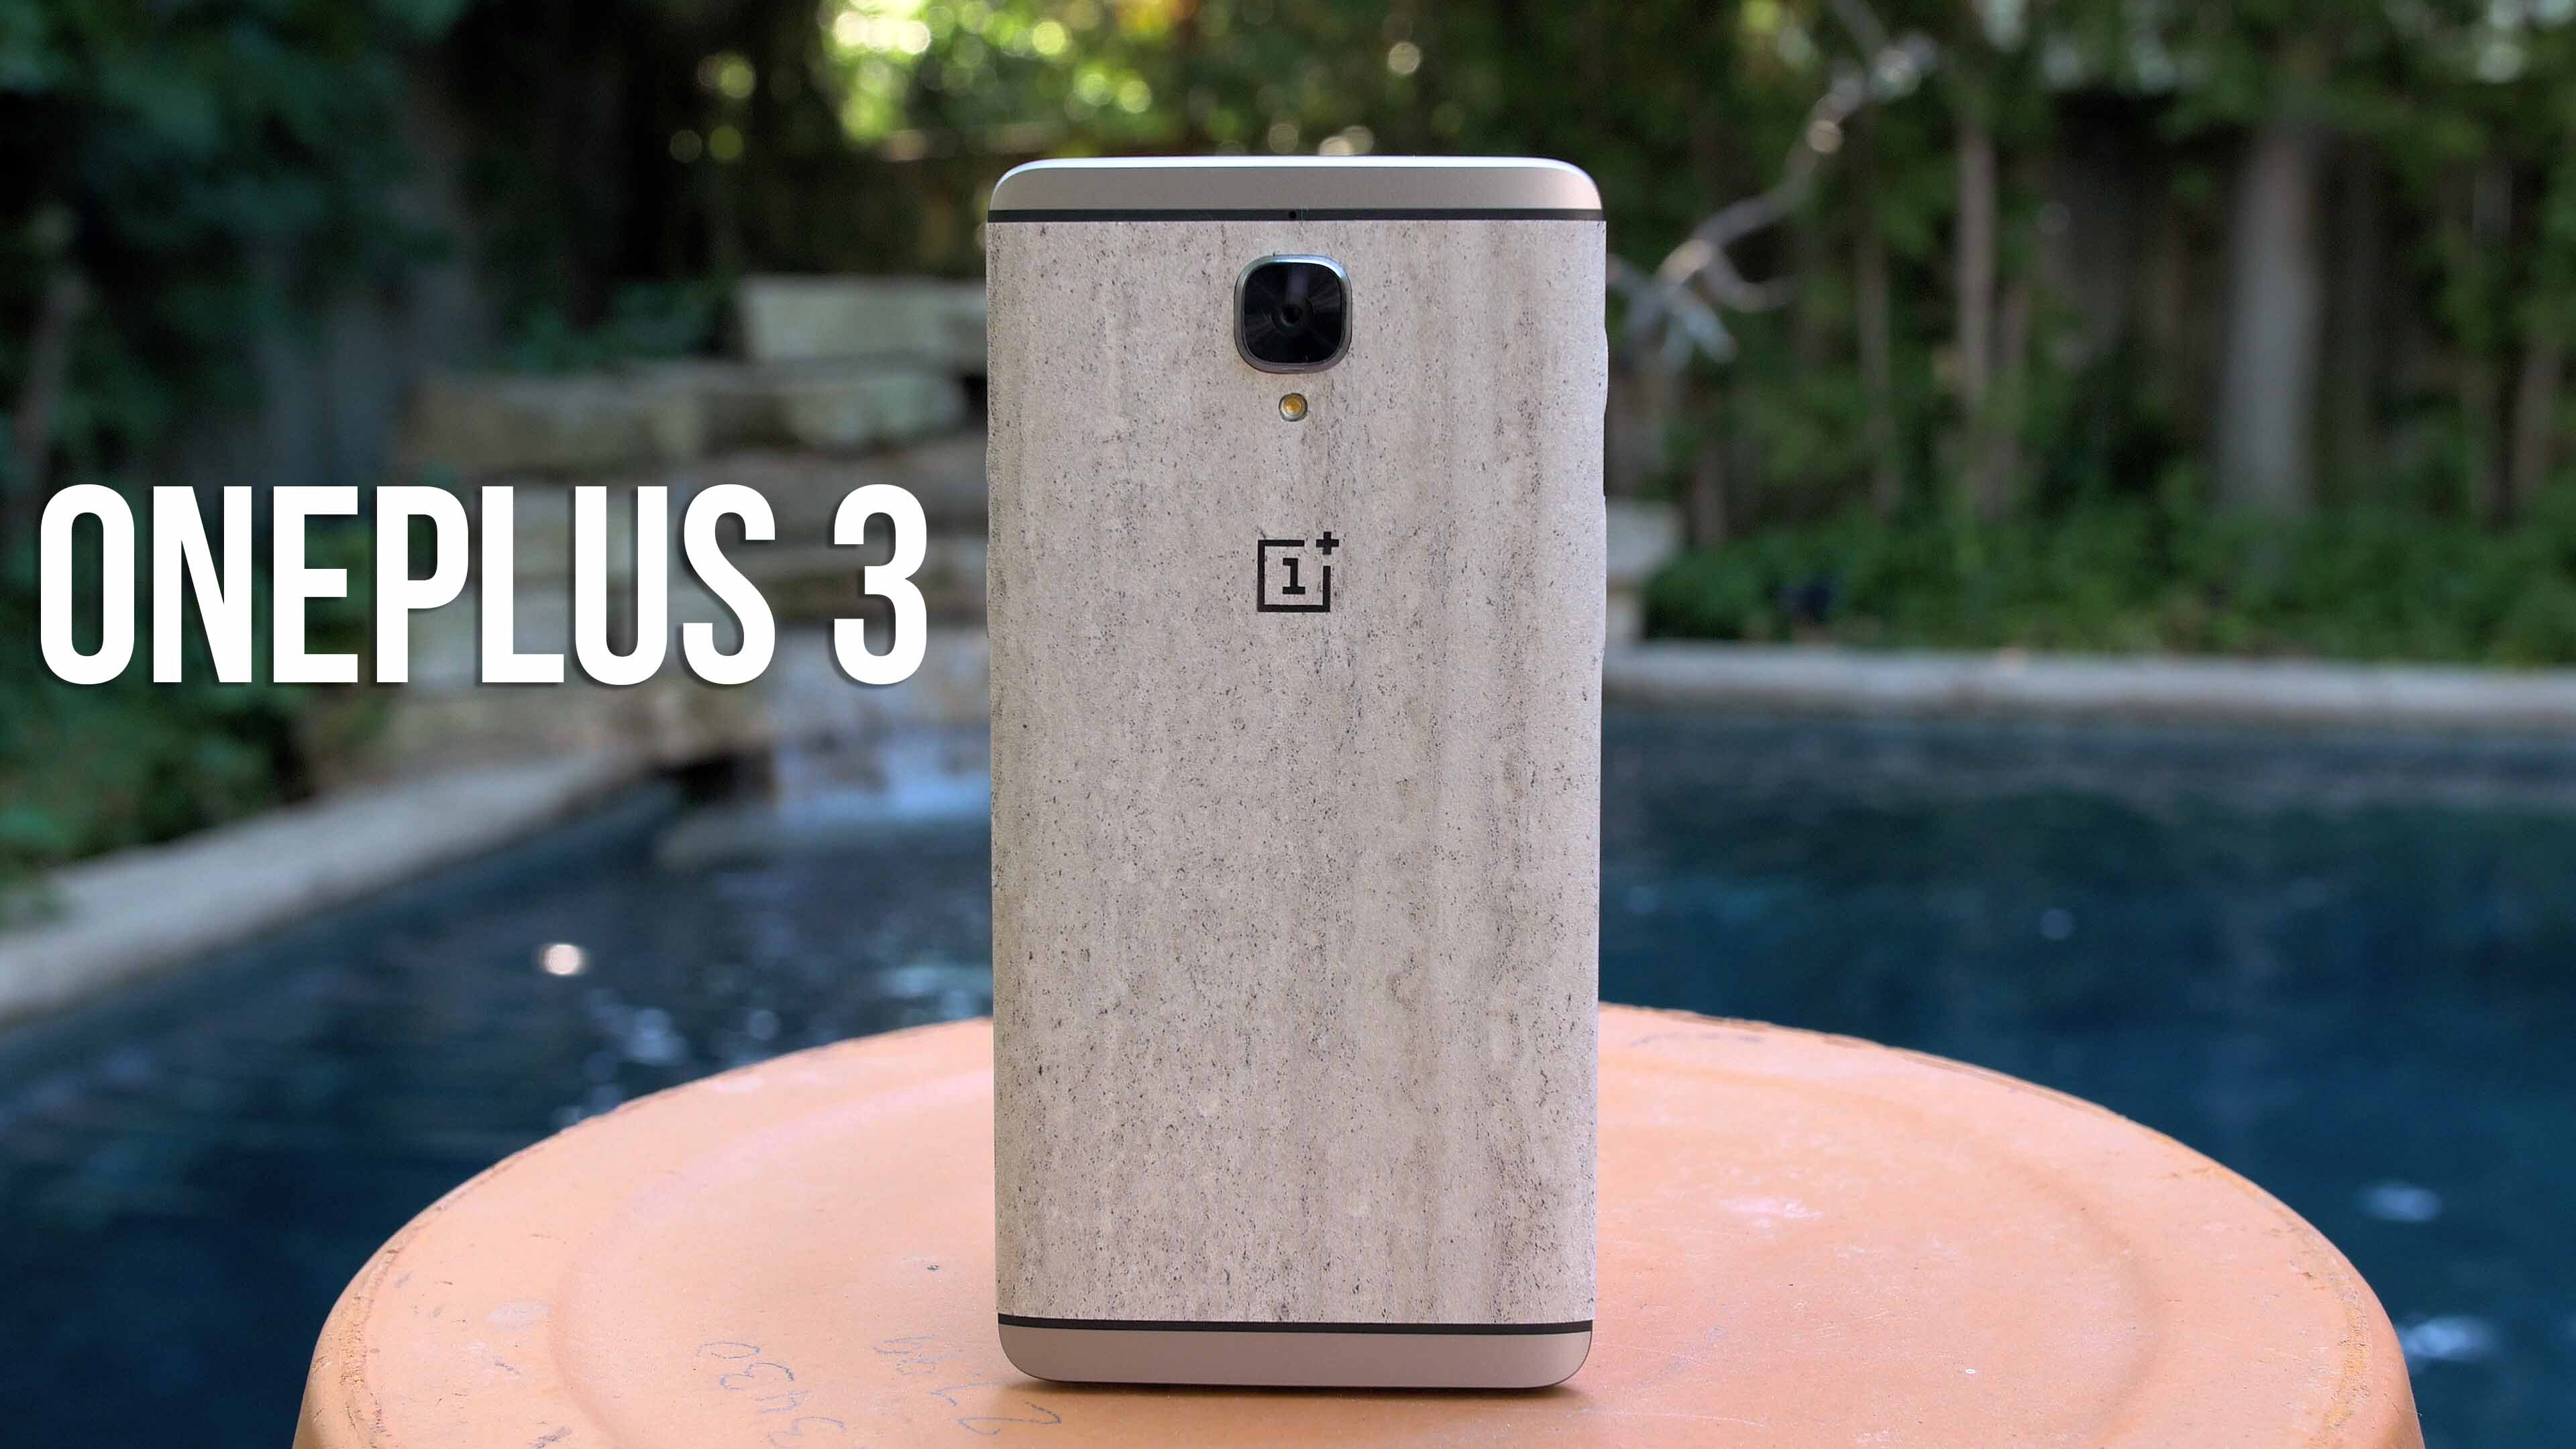 Android 7.0 Nougat beta version coming to OnePlus 3 in November, 2016